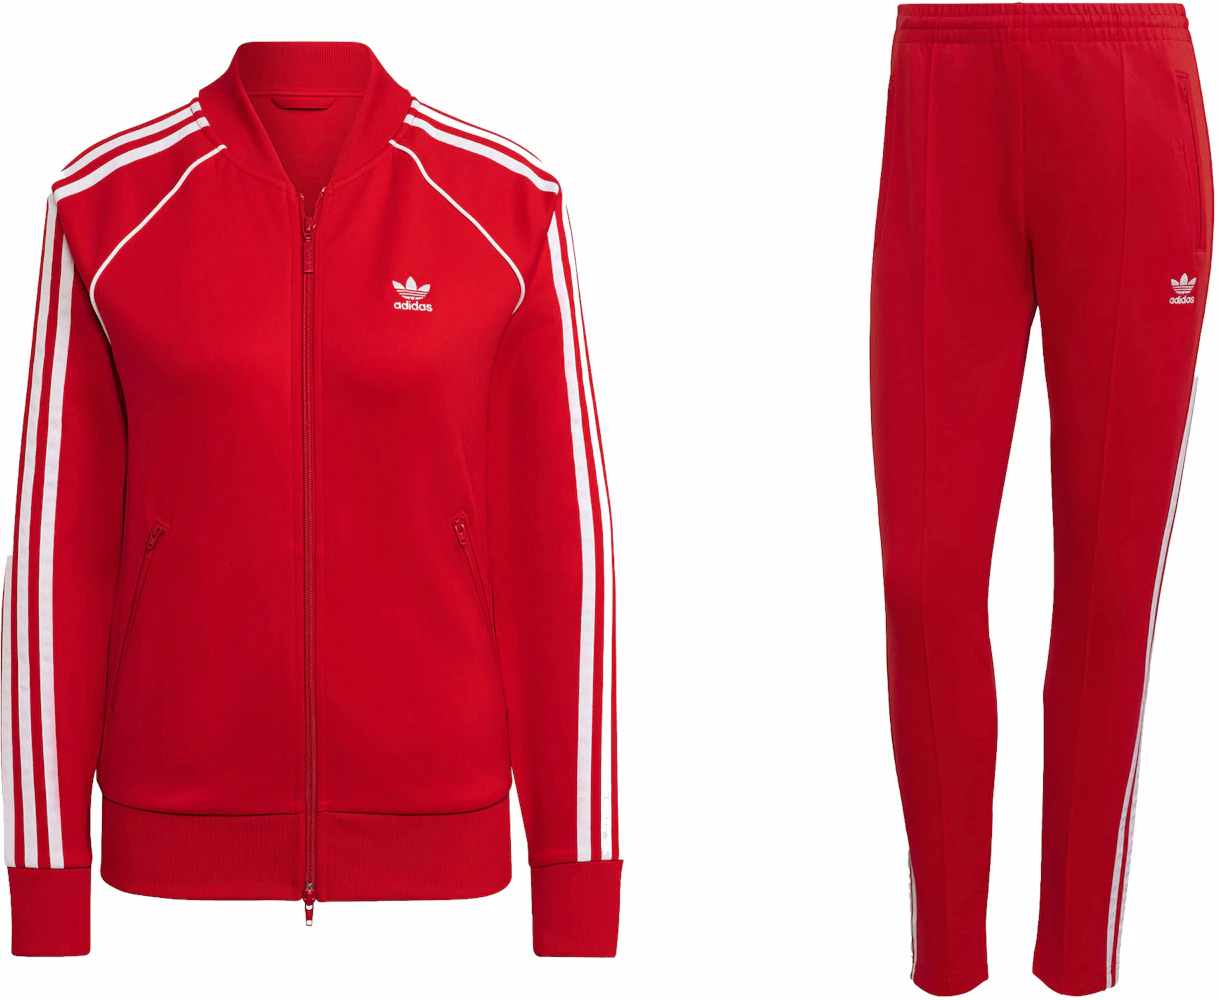 Buy Adidas Primeblue SST Tracksuit Bottoms Women vivid red from